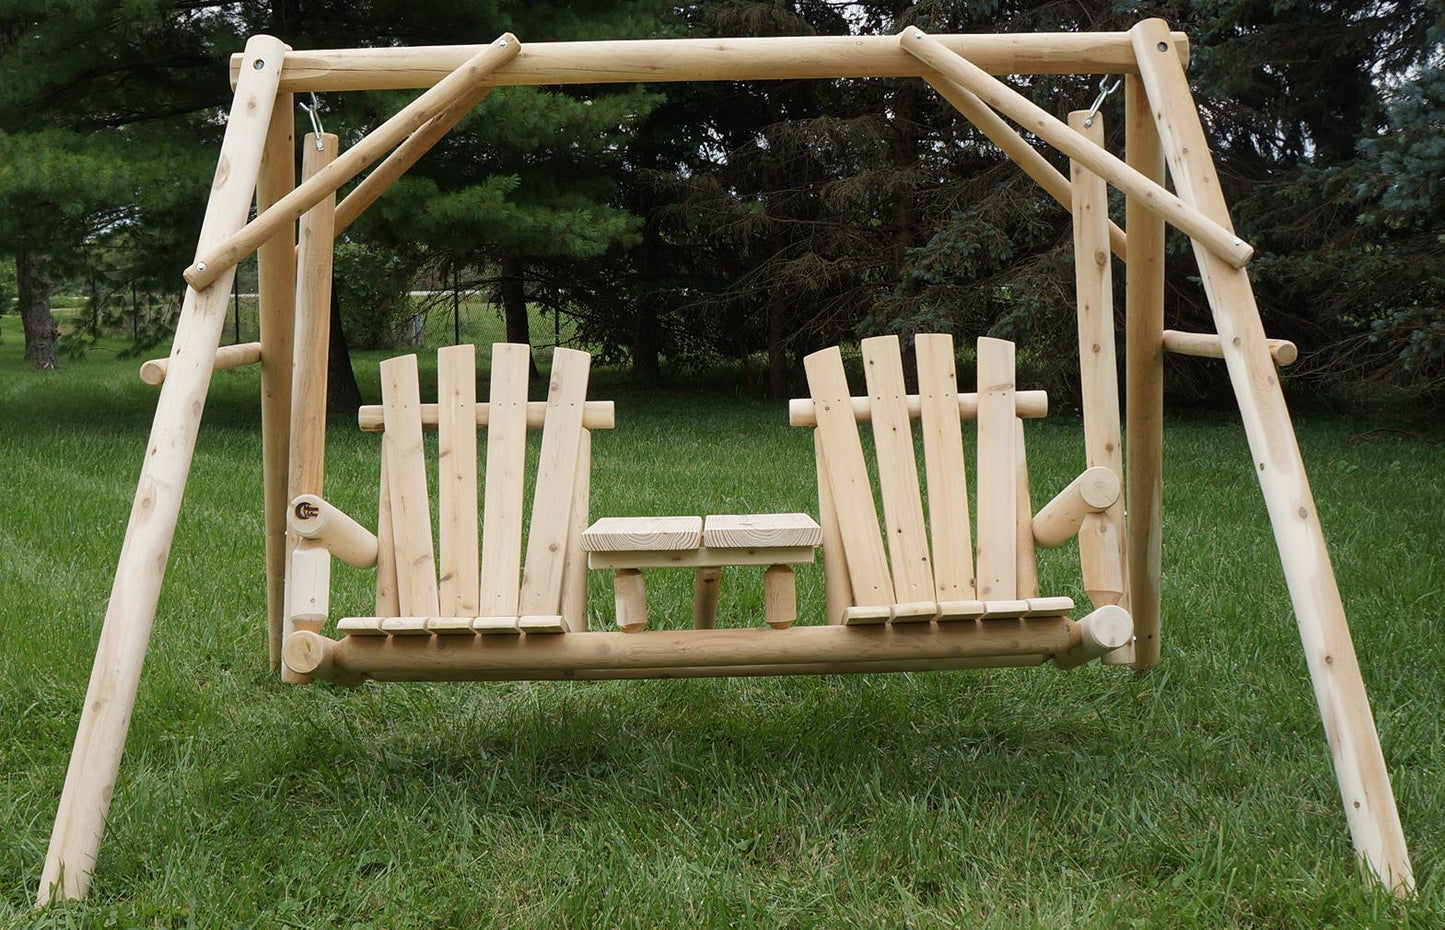 Moon Valley Rustic Tete-a-tete Lawn Swing - LEAD TIME TO SHIP 3 TO 4 WEEKS - LEAD TIME TO SHIP 4 WEEKS OR LESS